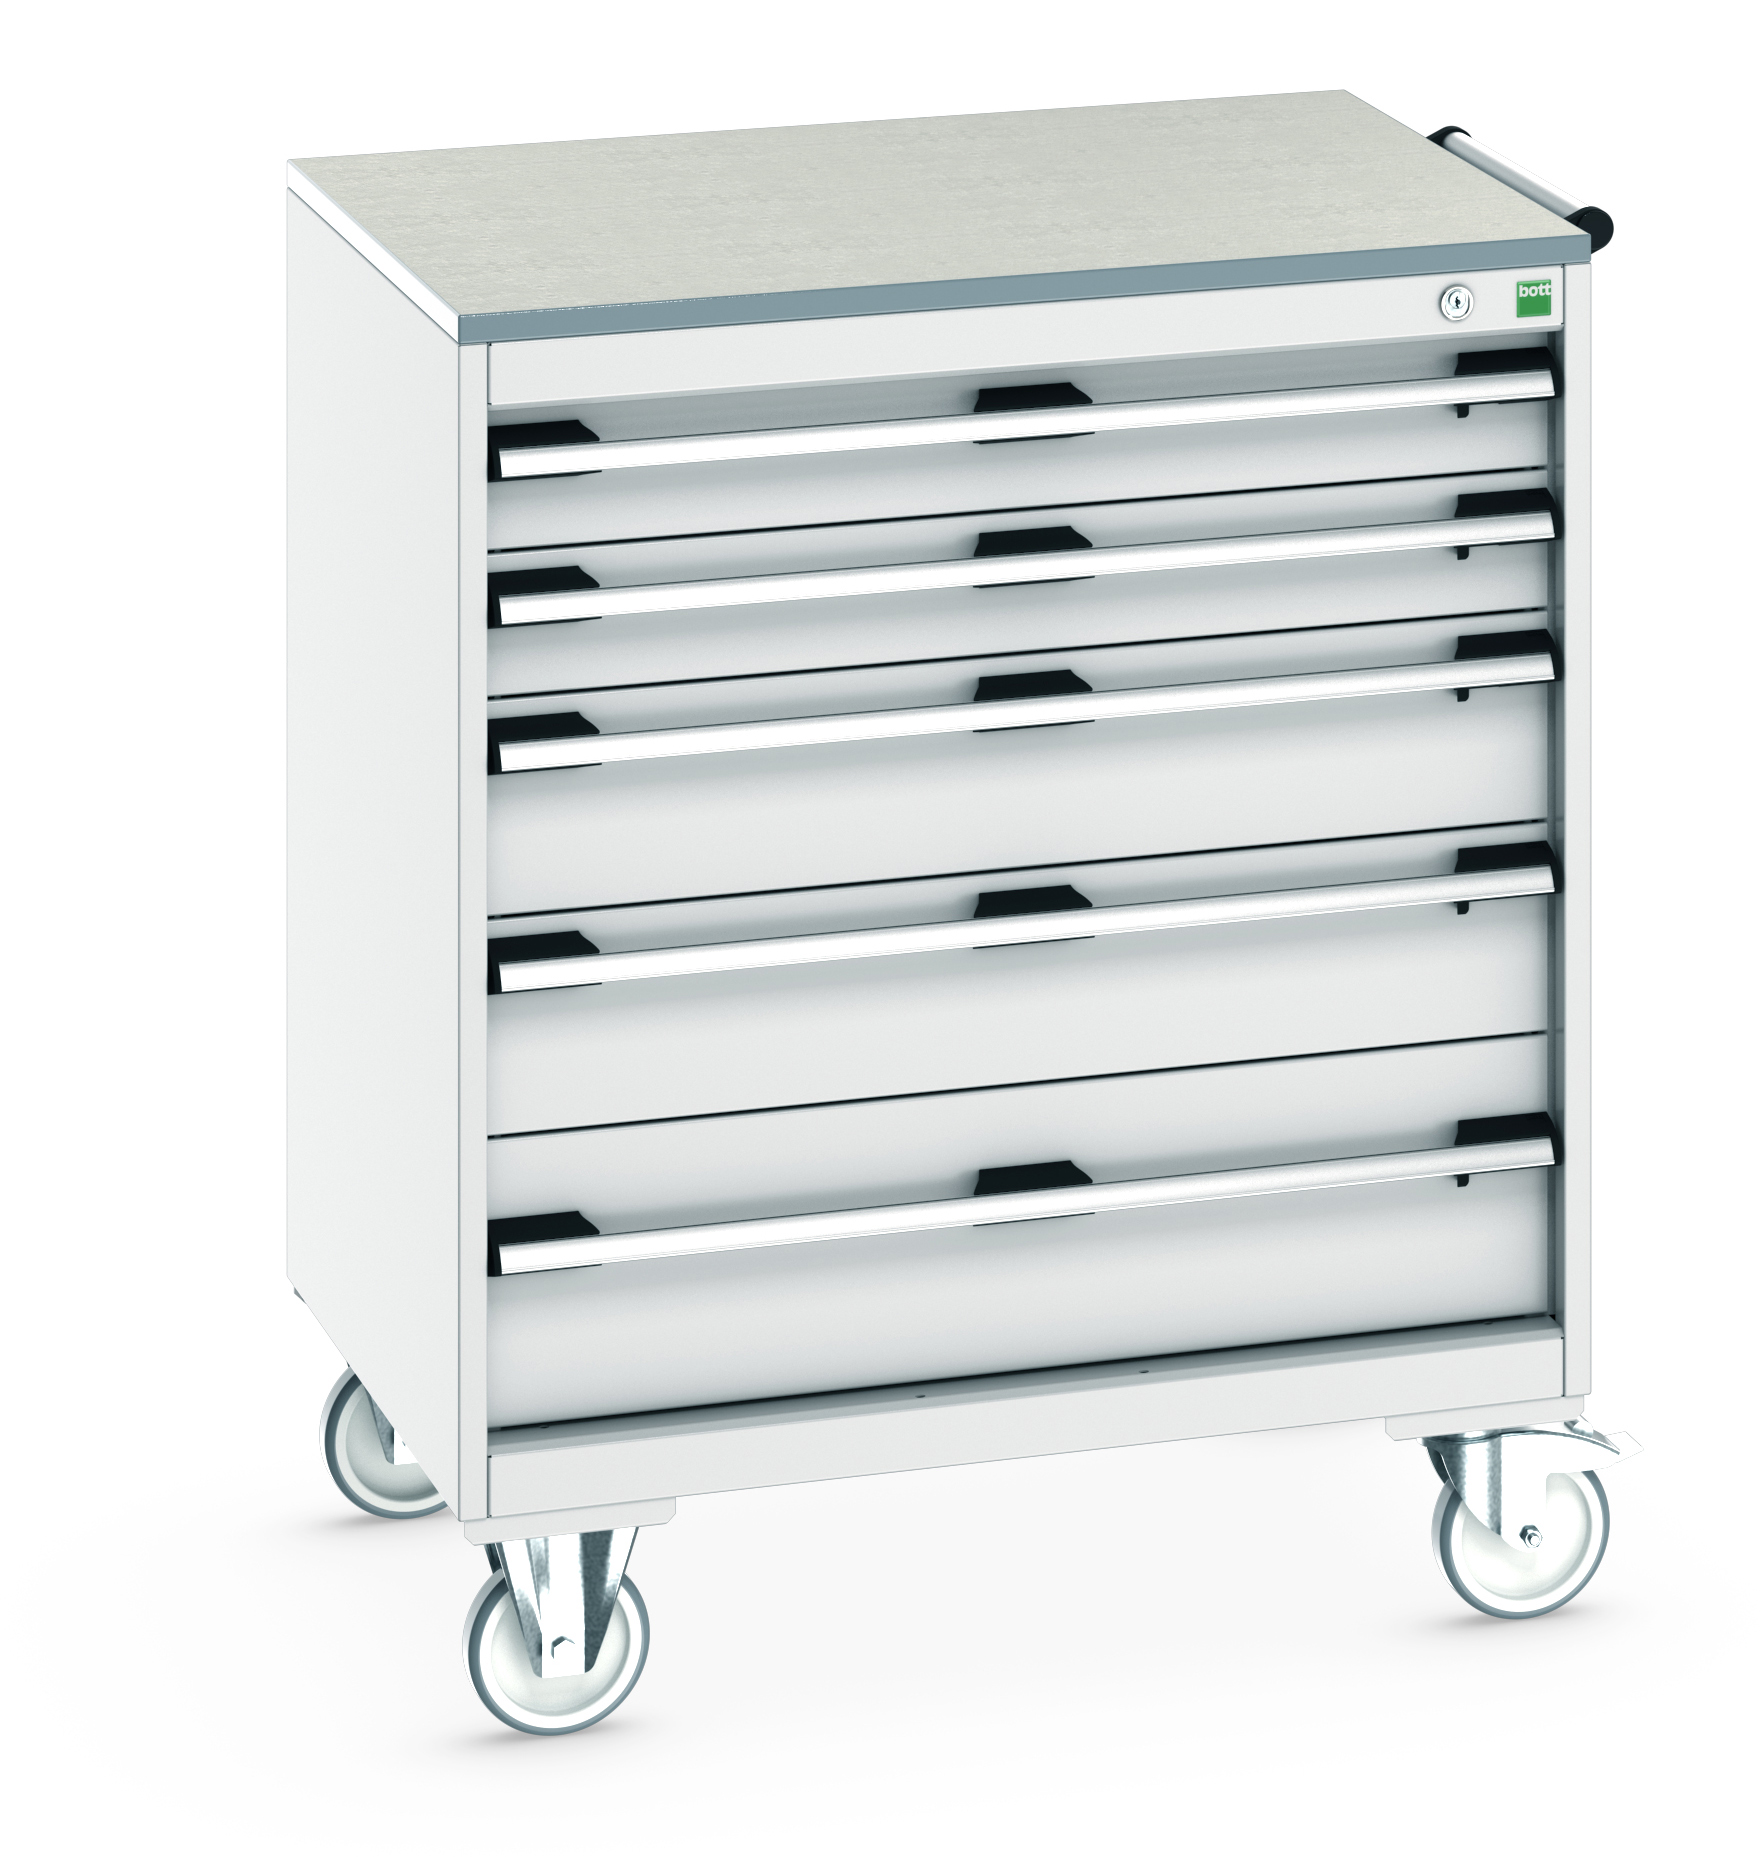 Bott Cubio Mobile Drawer Cabinet With 5 Drawers & Lino Worktop - 40402158.16V